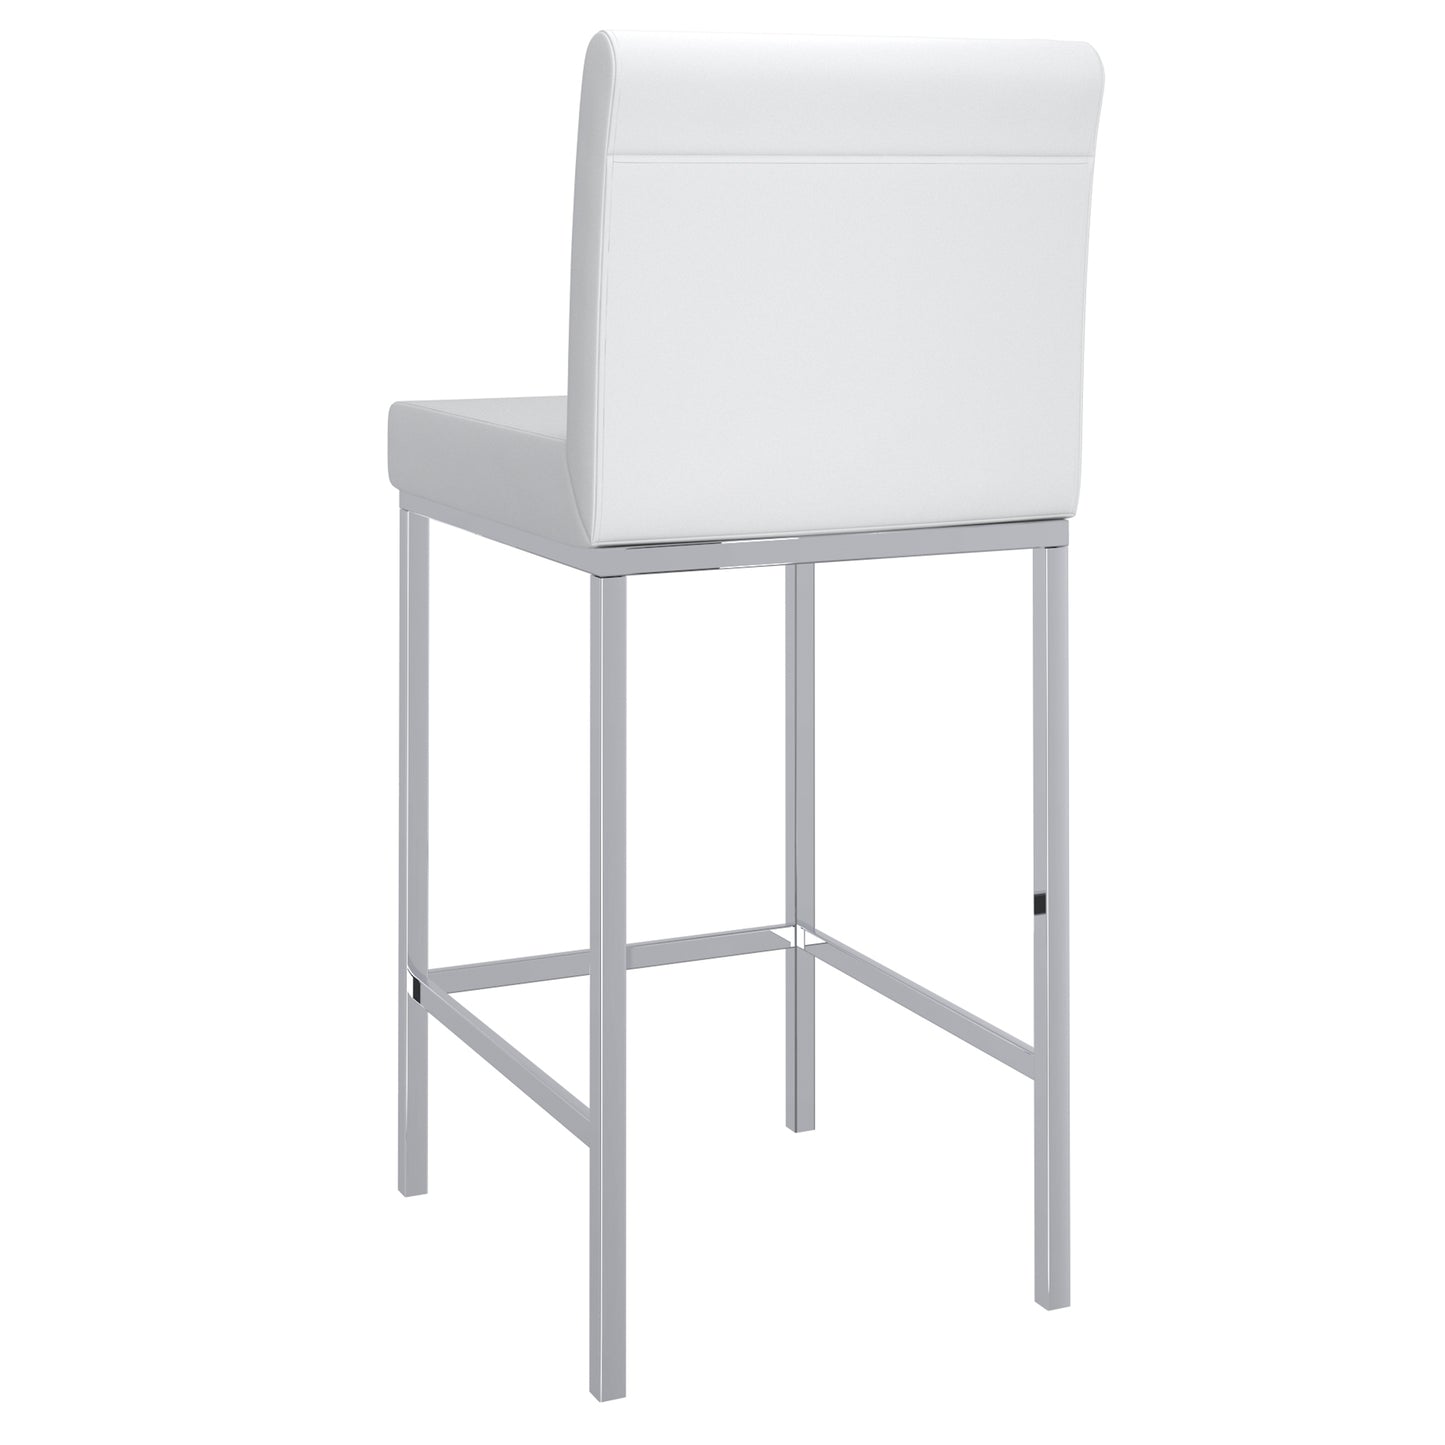 (PORTO WHITE- 2 PACK) - LEATHER COUNTER STOOLS- OUT OF STOCK UNTIL JUNE 30, 2023